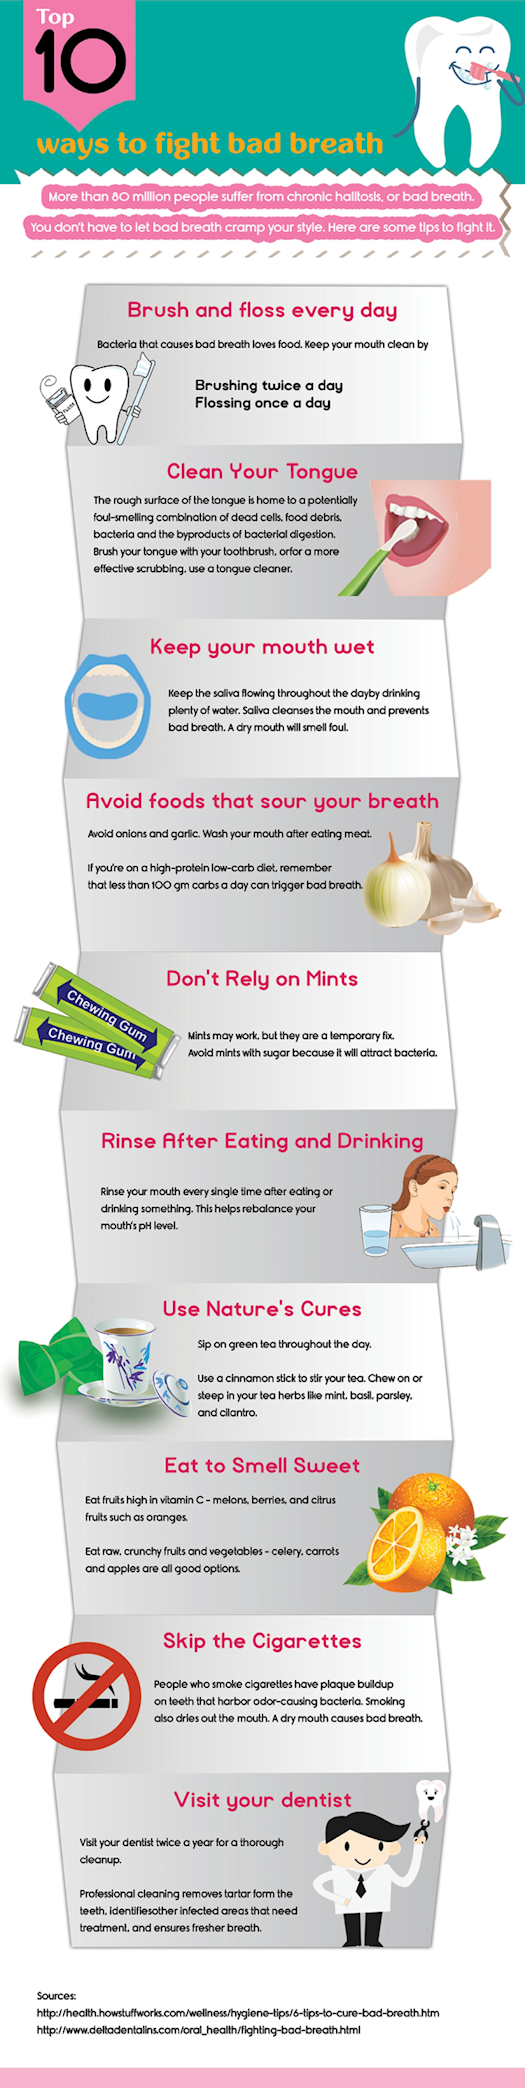 Top 10 ways to fight bad breath Infographic